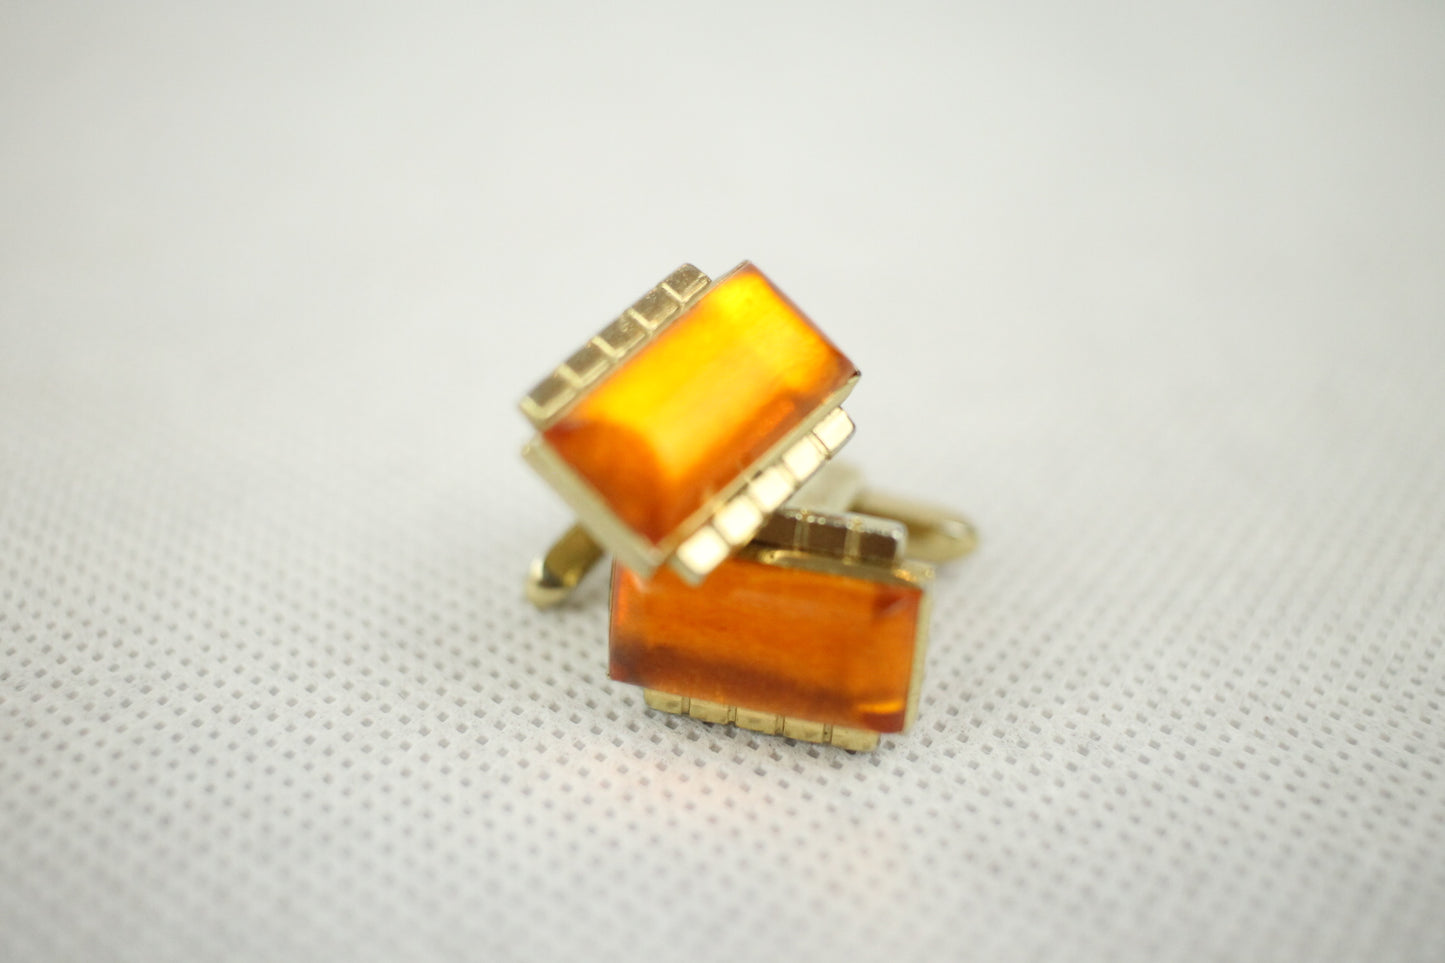 Vintage Hickok Amber Lucite Gold Metal Push Through Cuff Links